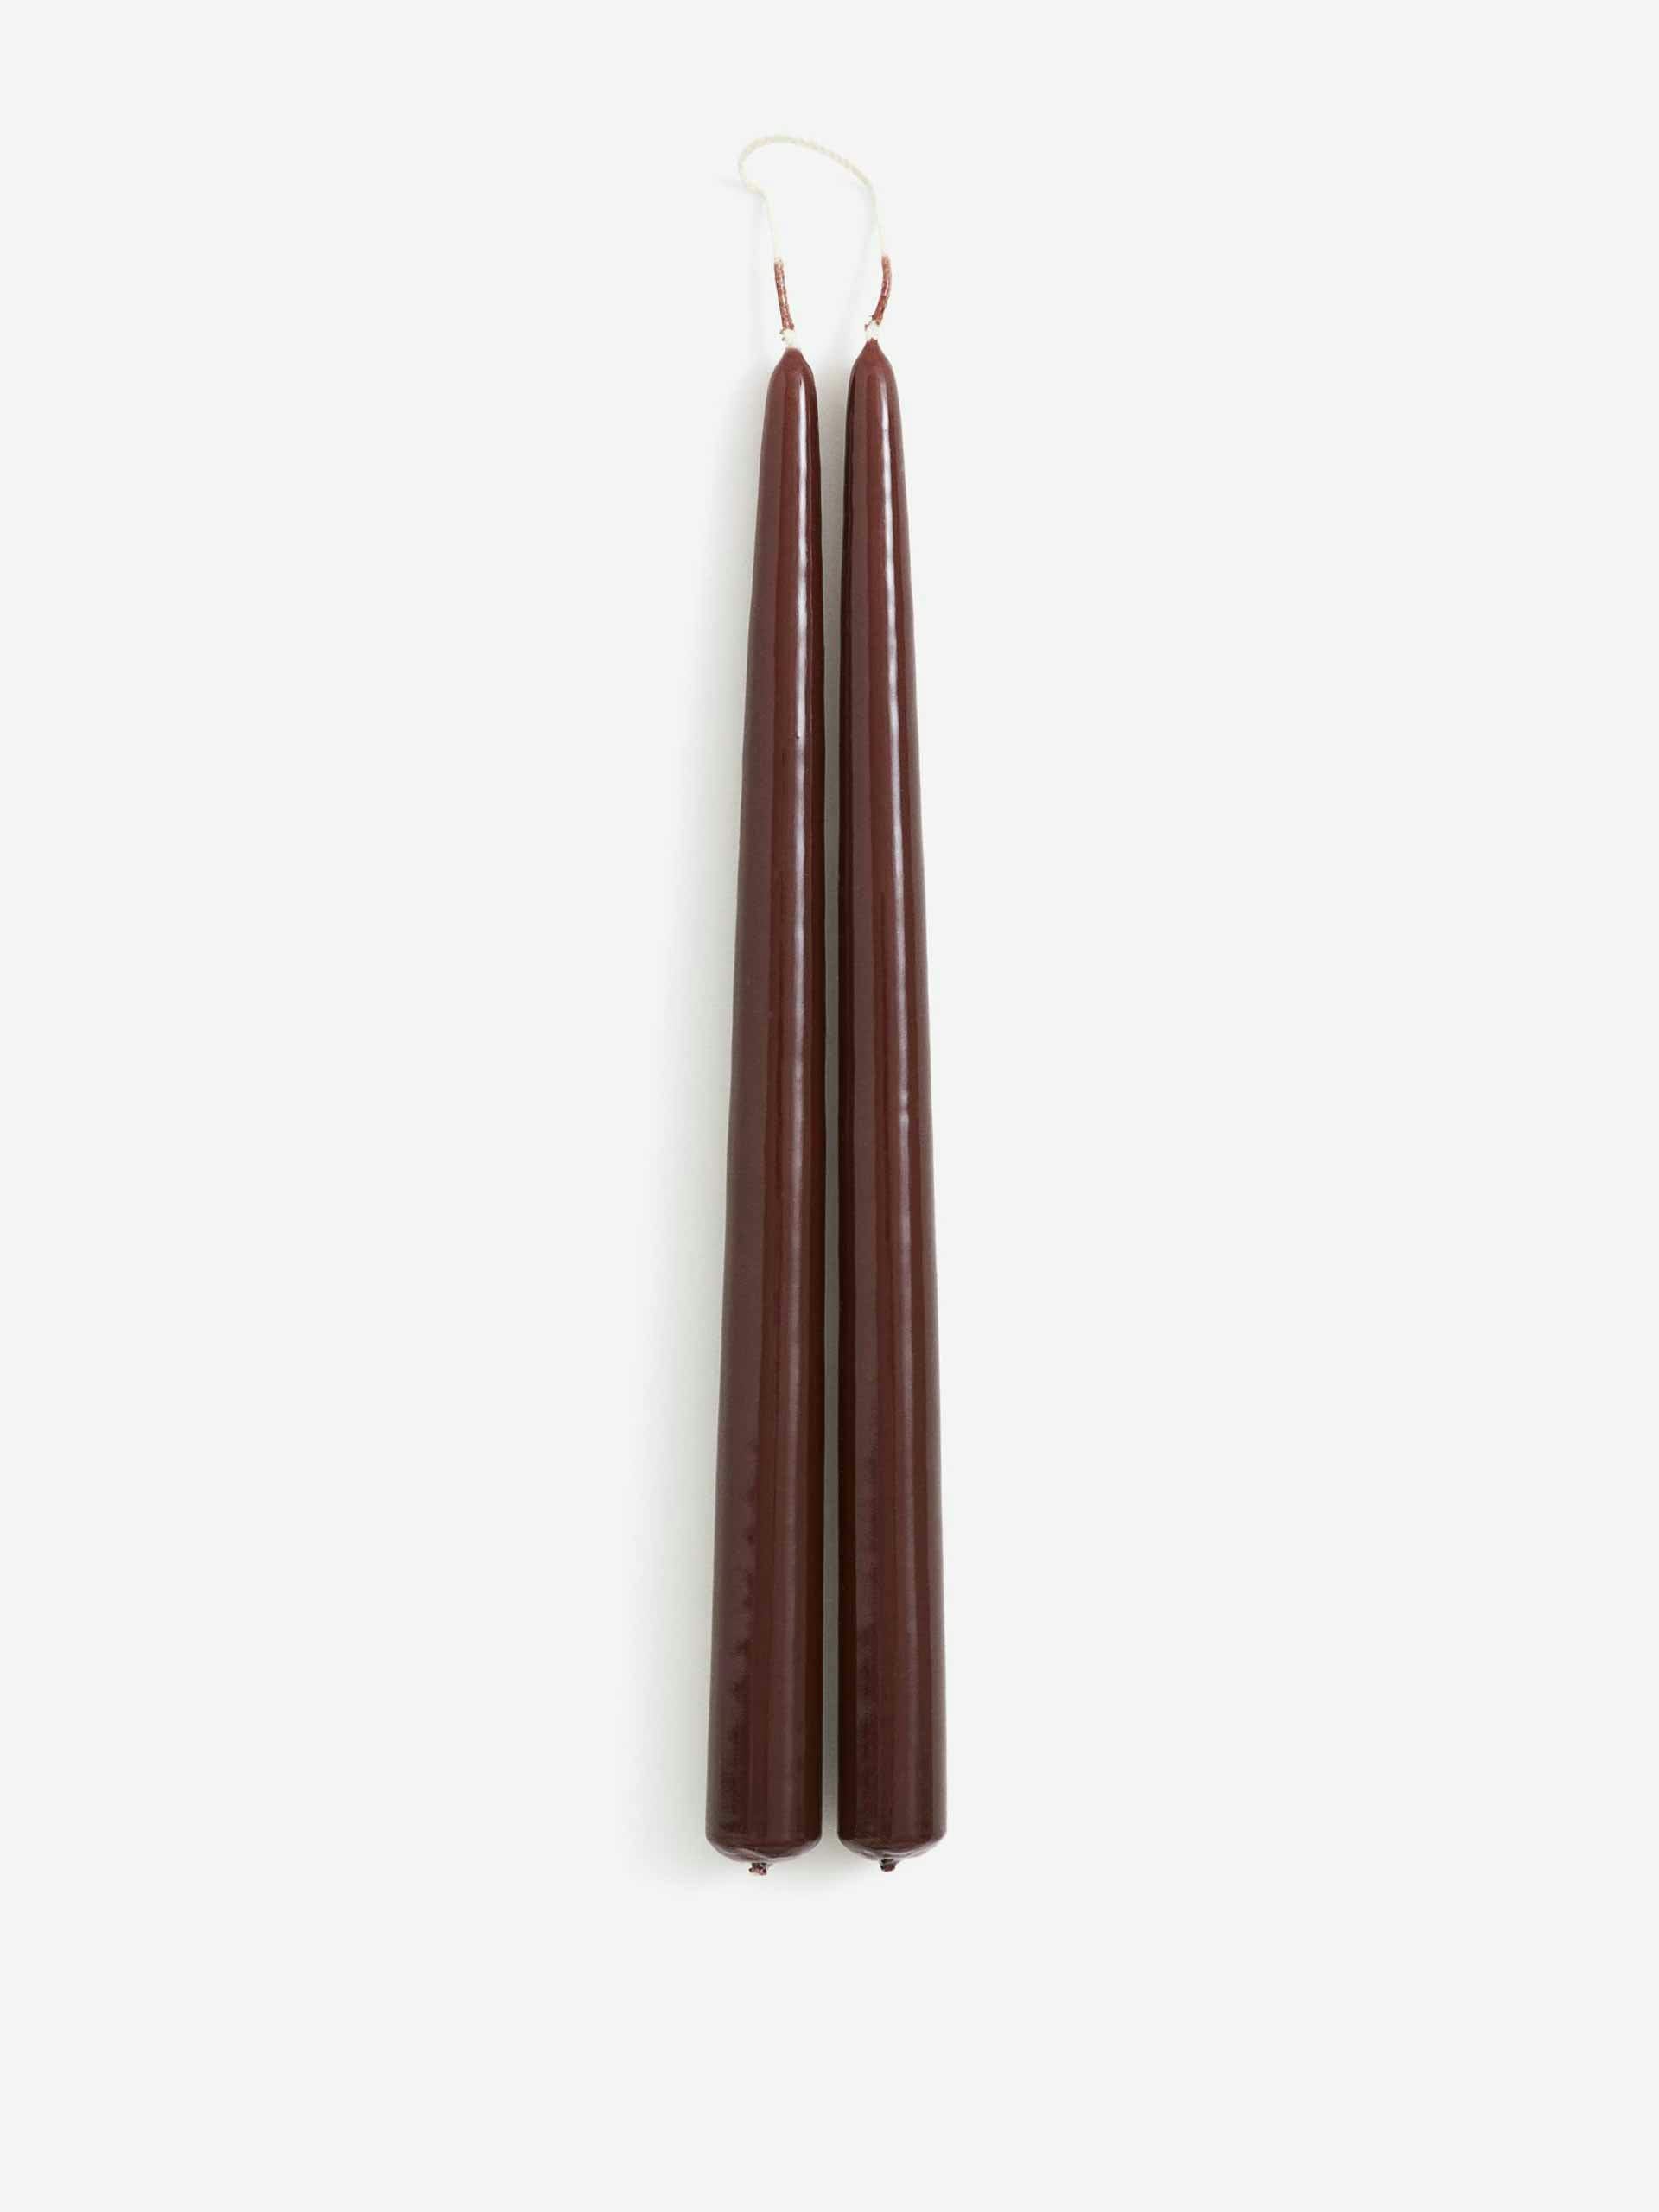 Brown tapered candles (2-pack)